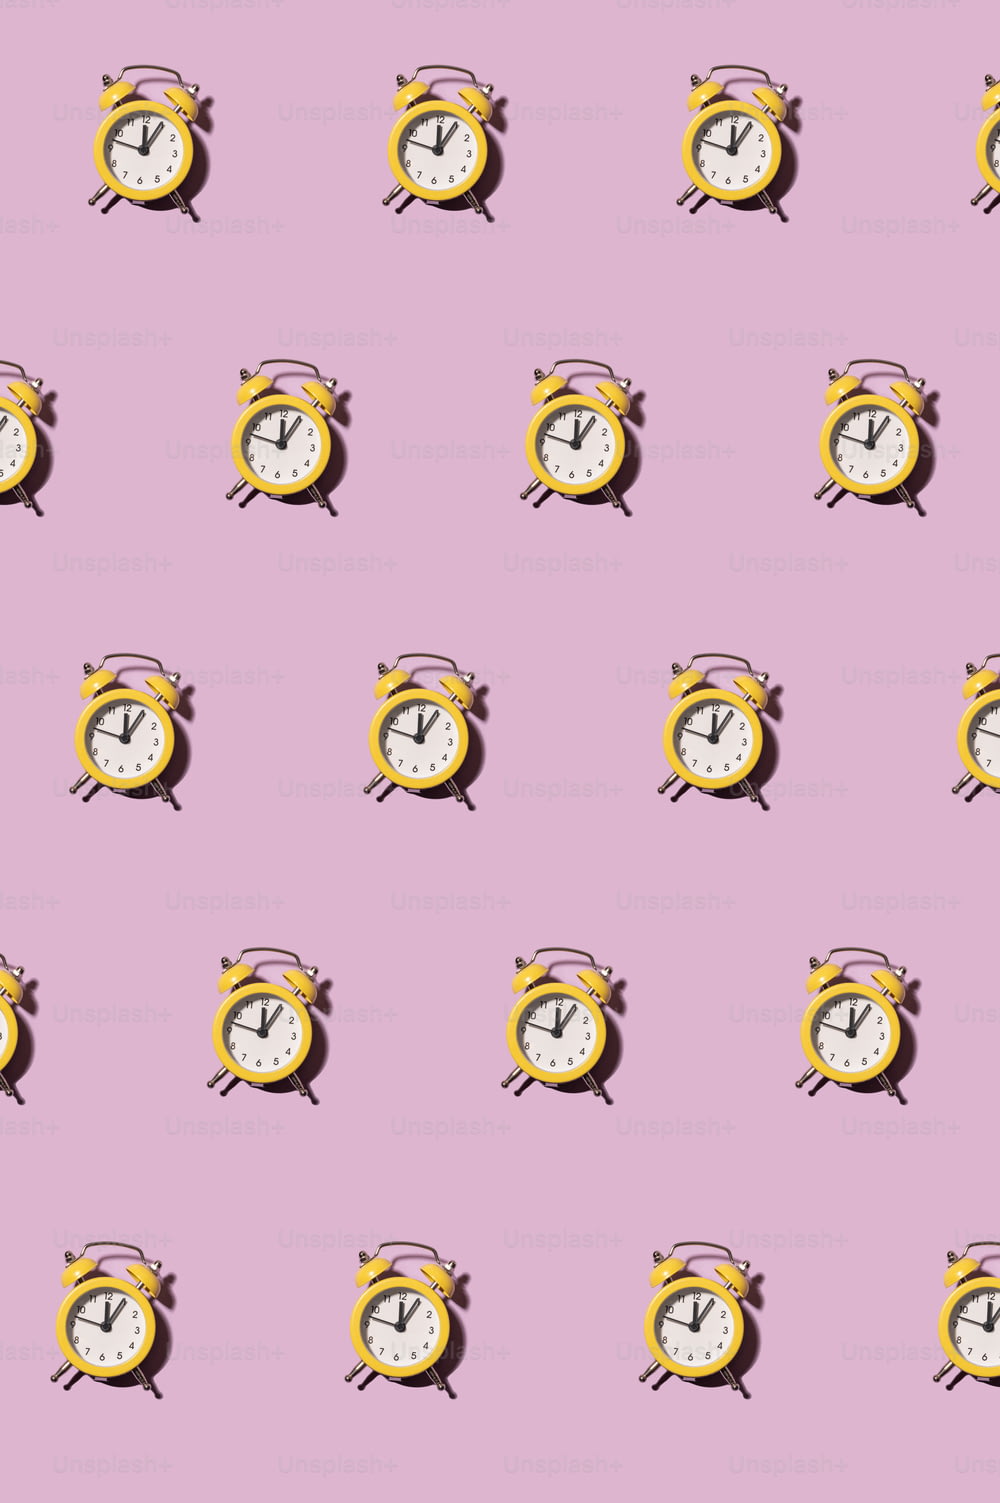 a pink background with a pattern of yellow and white clocks